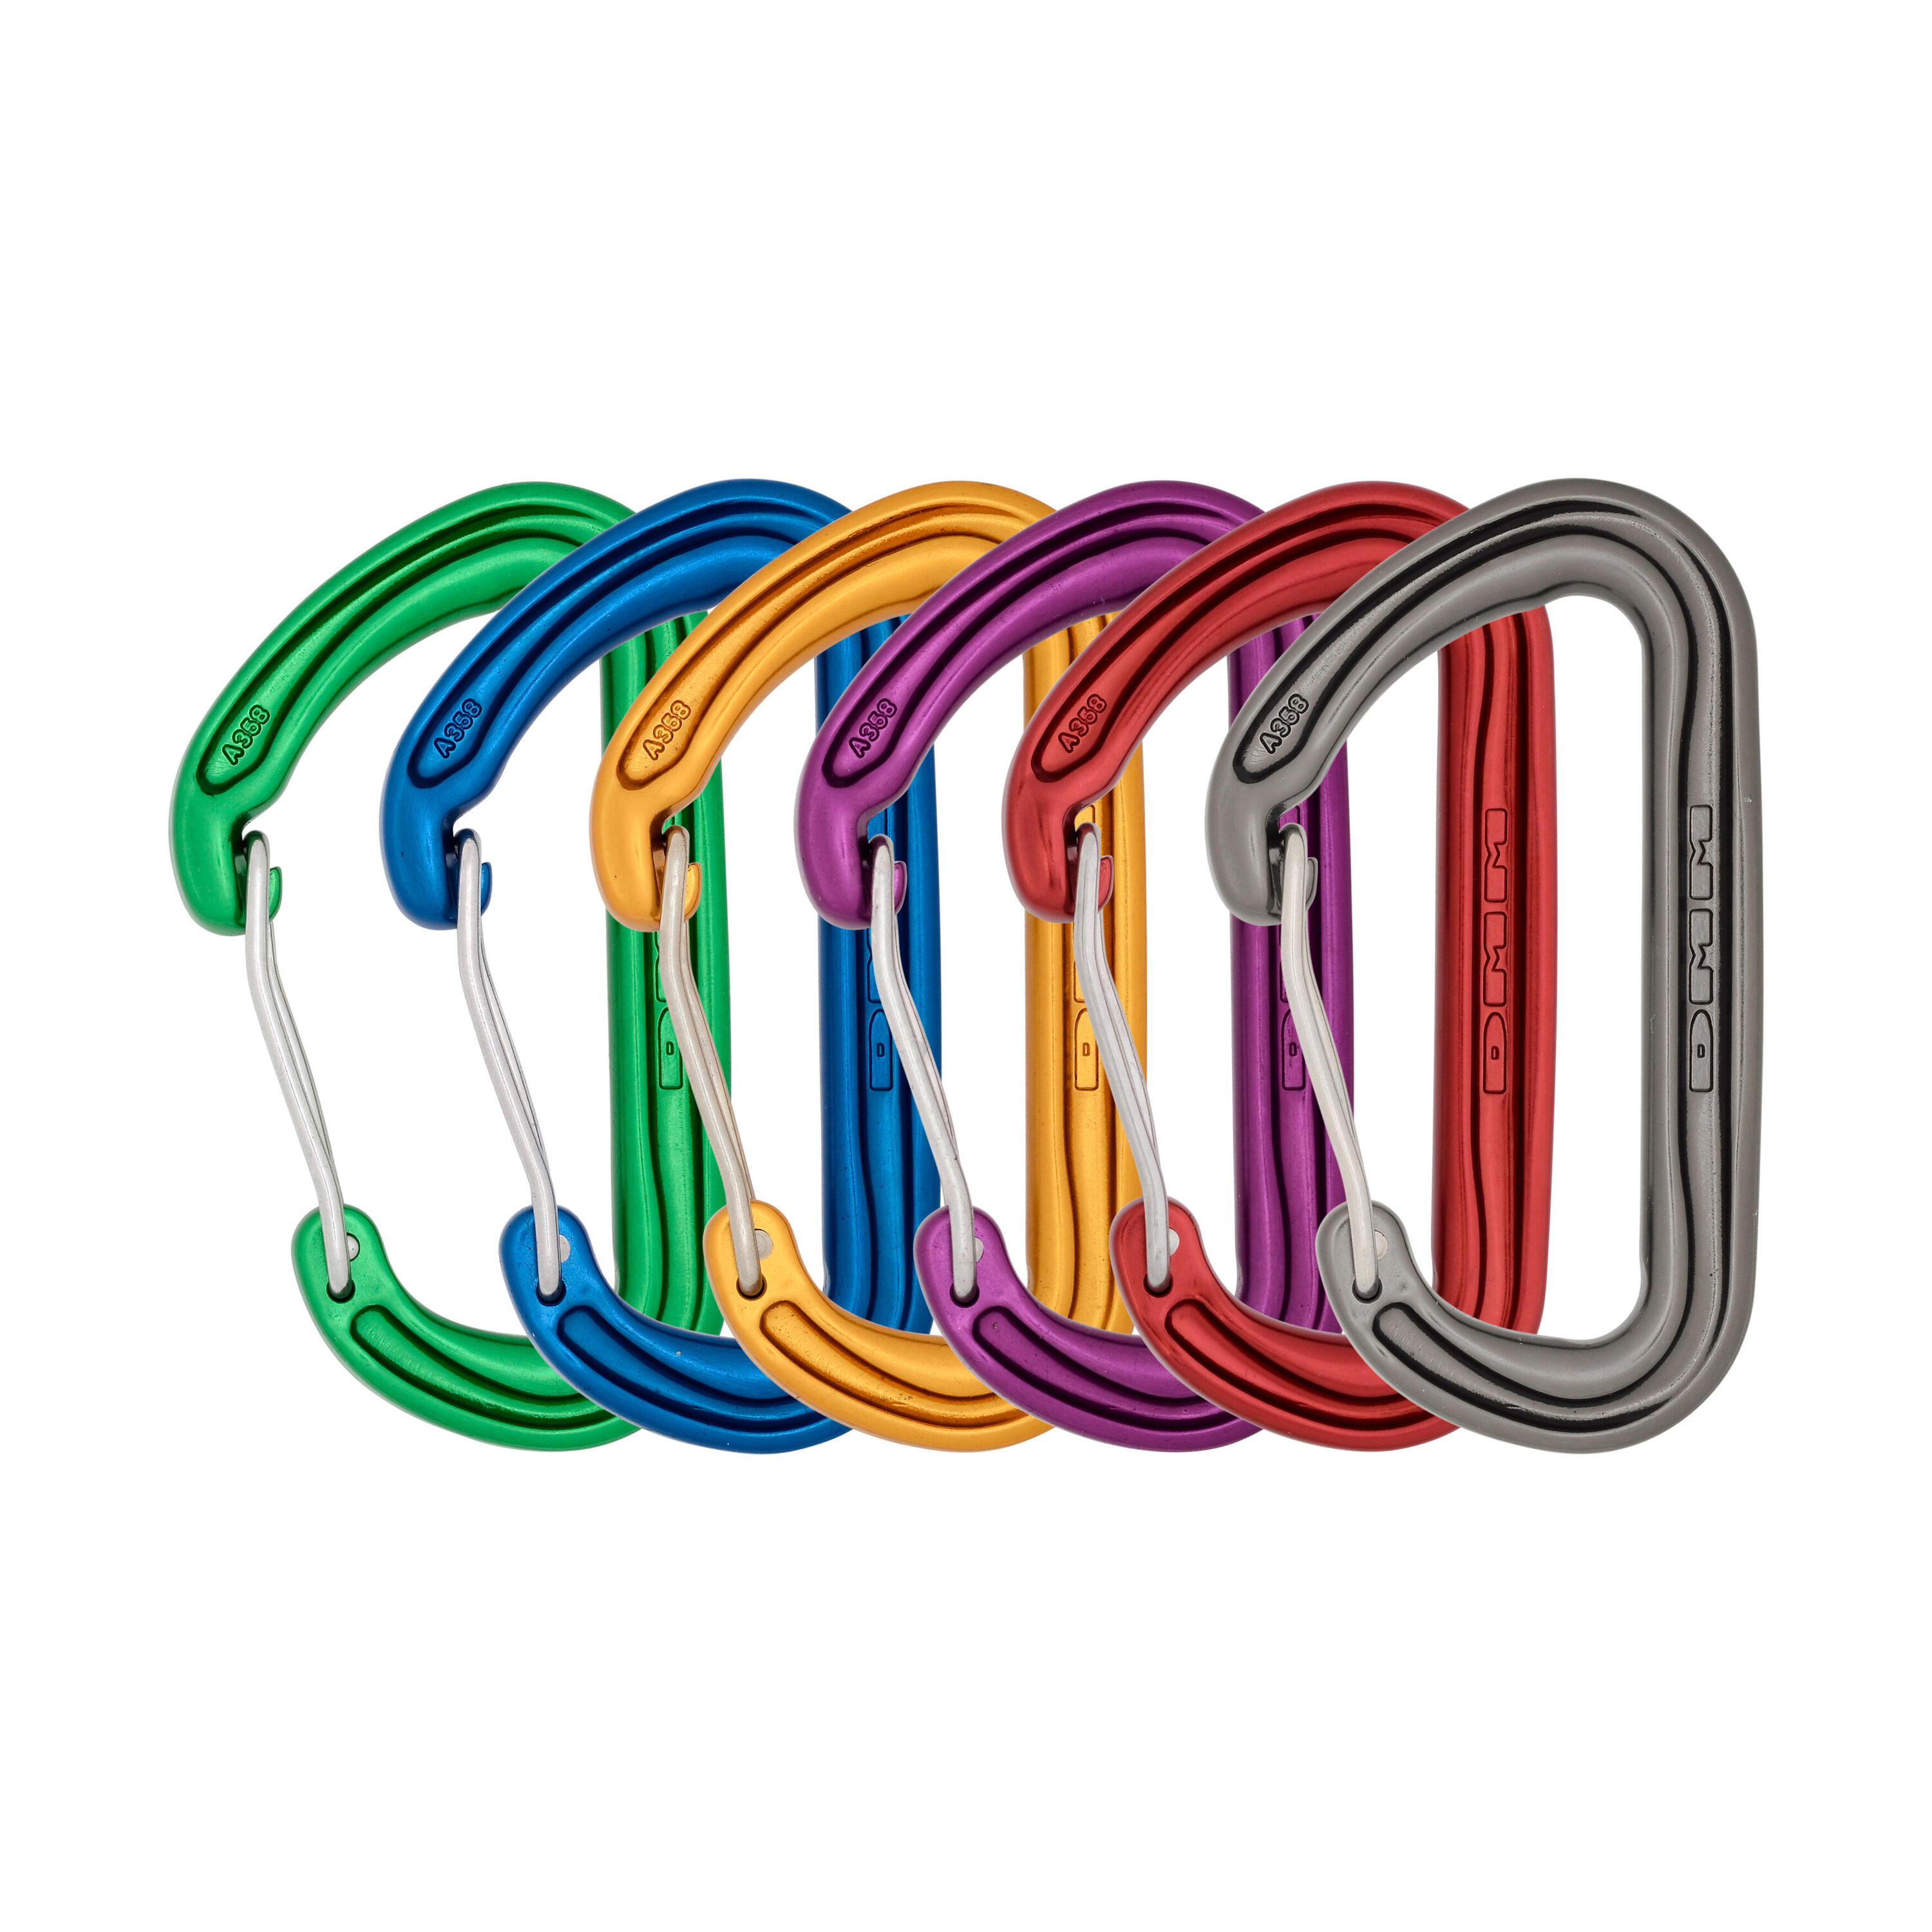 DMM Spectre Wiregate Carabiner - 6 Pack - Assorted